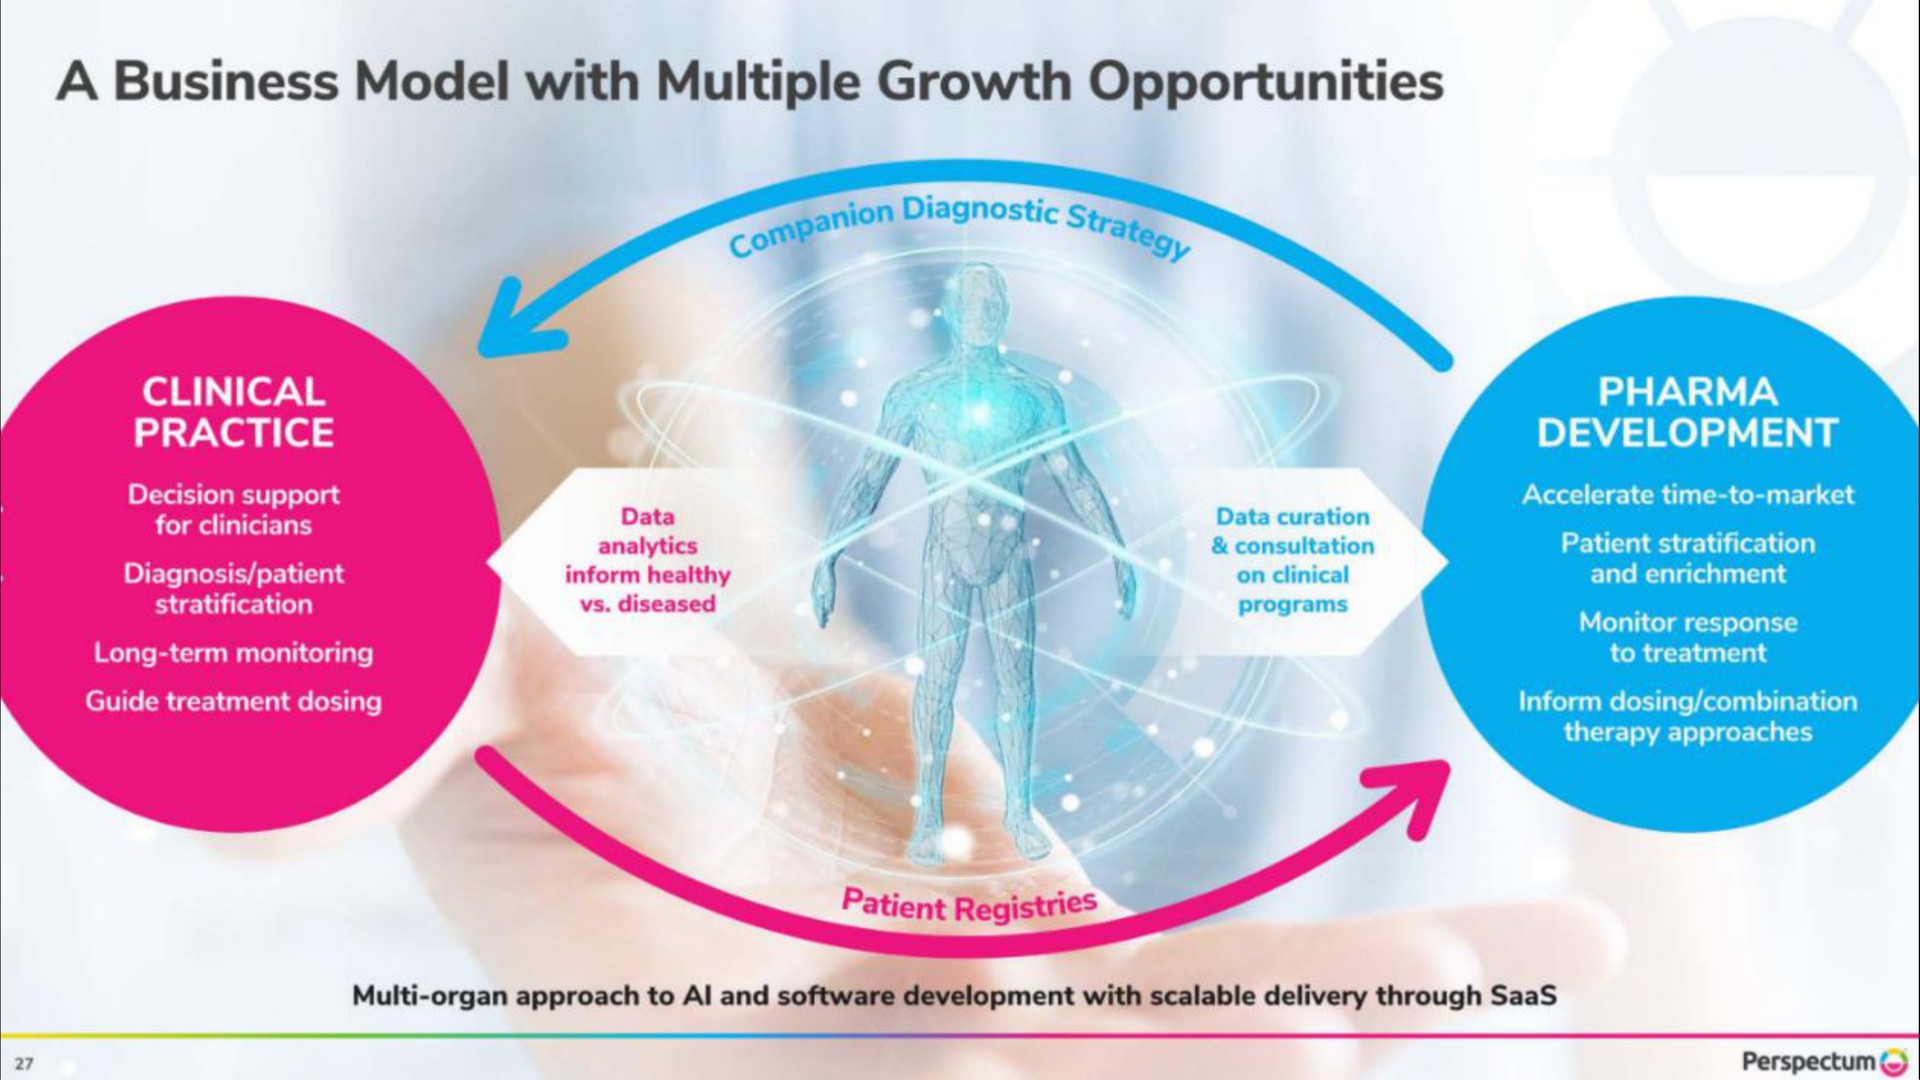 a business model with multiple growth opportunities clinical nea cee development | Perspectum